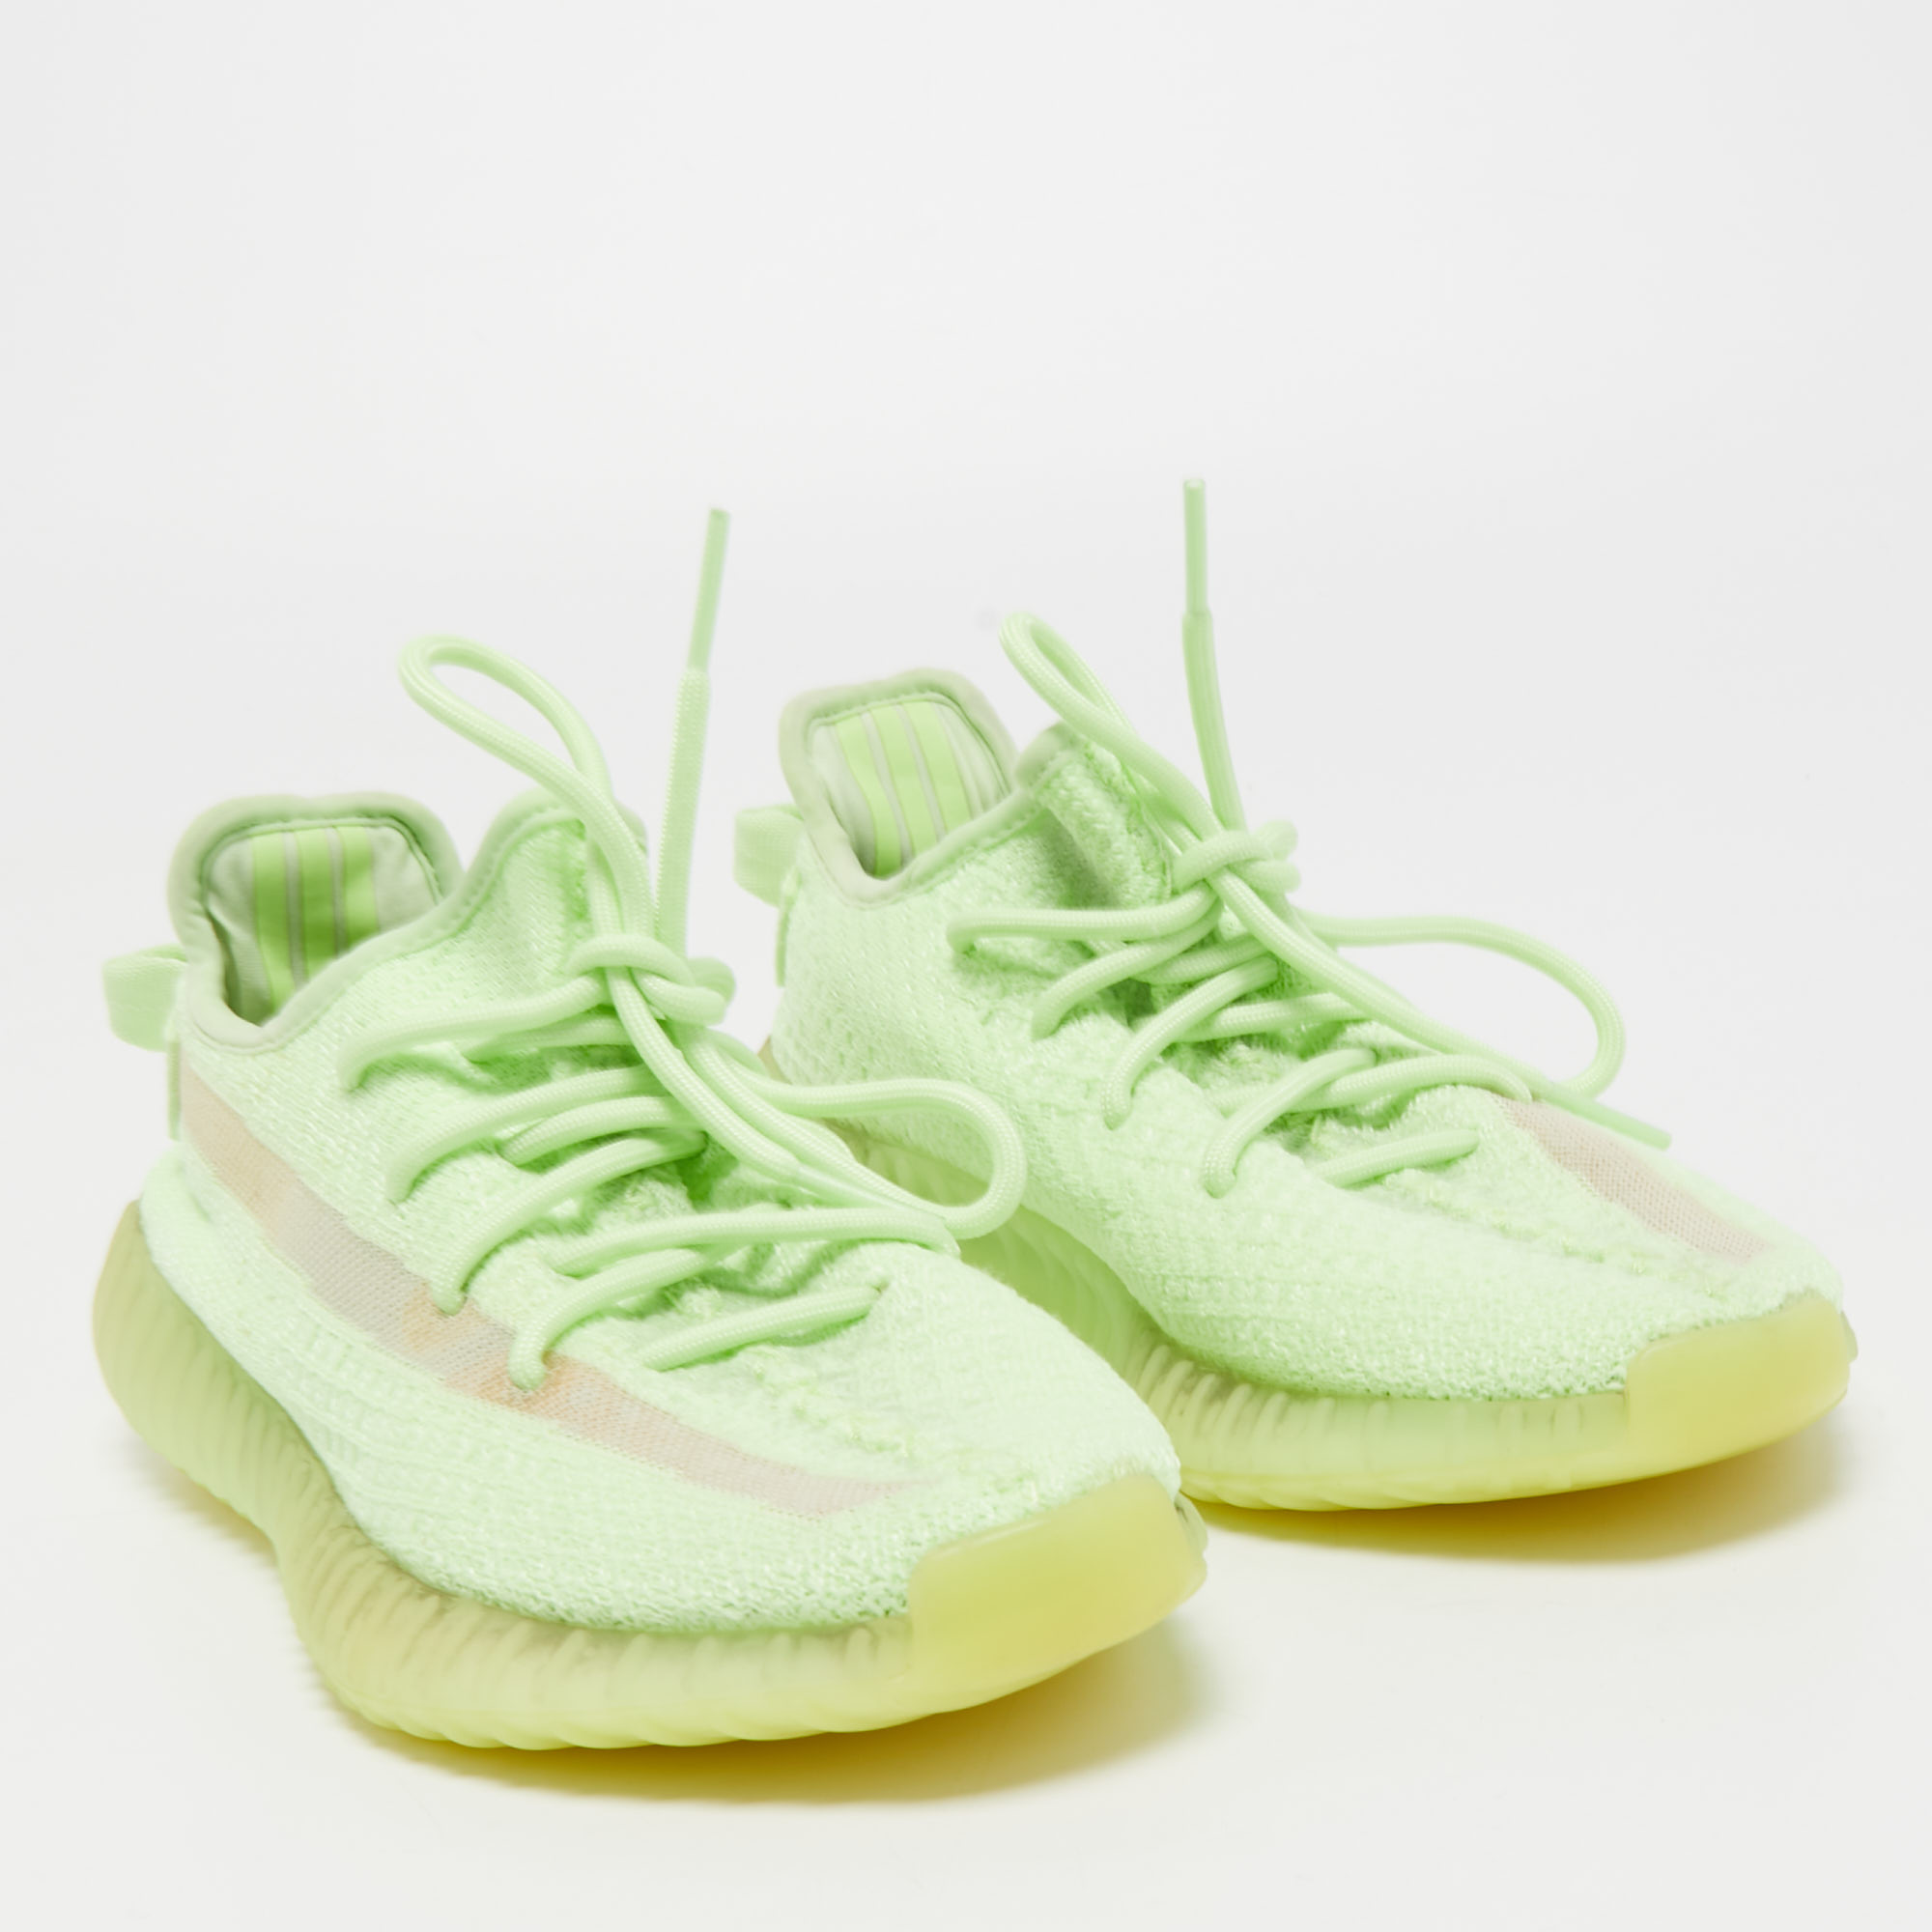 Yeezy X Adidas Neon Green Knit Fabric Boost 350 V2 Glow Sneakers Size 40